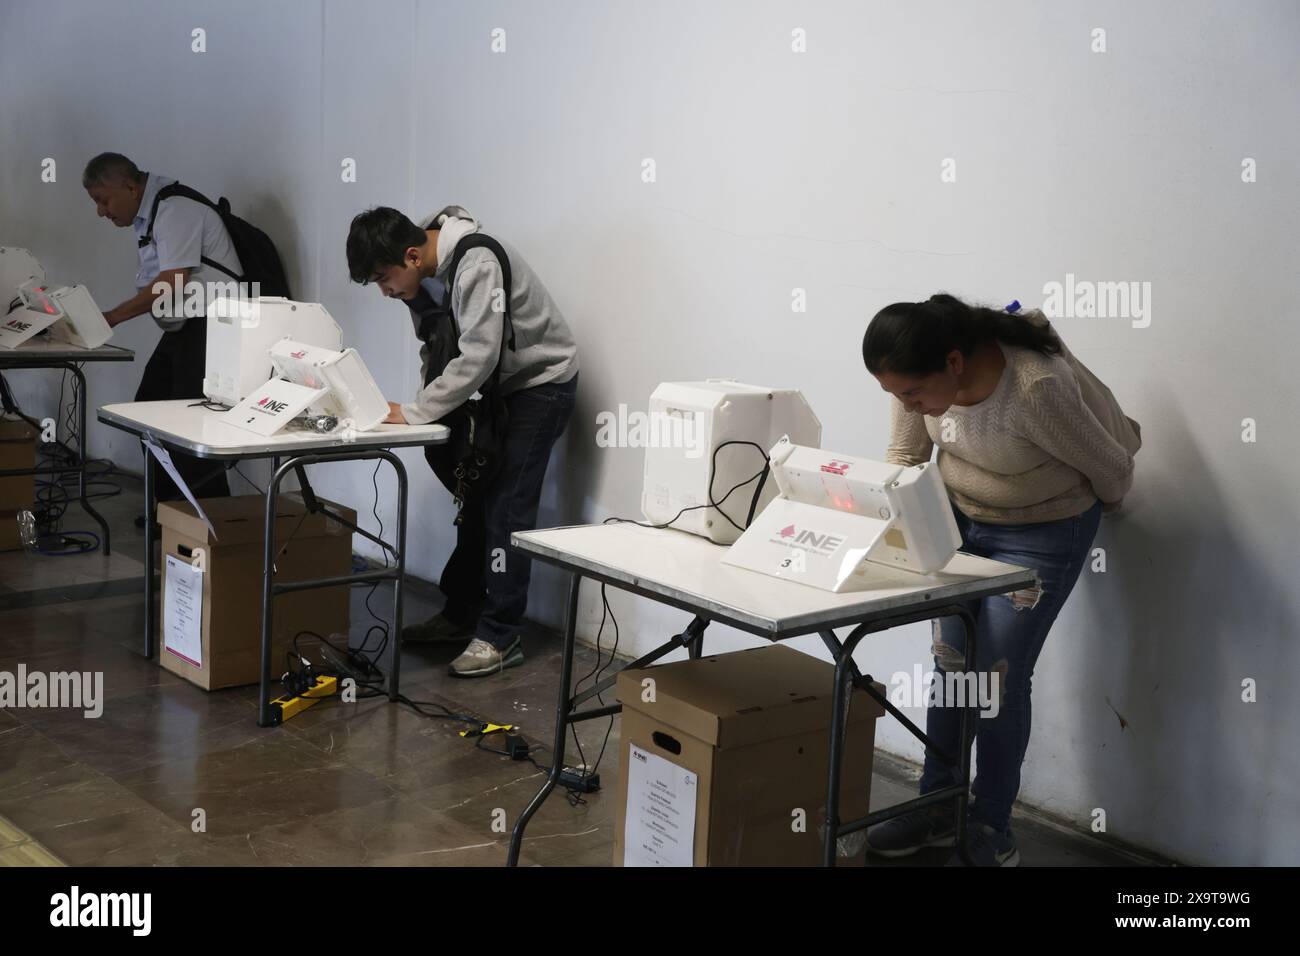 A Mexican citizen casting their vote at a Electronic ballot box during the 2024 Mexico's general election. Thousands of Mexican citizens go to  polling stations  throughout the country to cast their vote.   on June 2, 2024 in Mexico City, Mexico. (Photo by Ismael Rosas/ Eyepix Group) Stock Photo